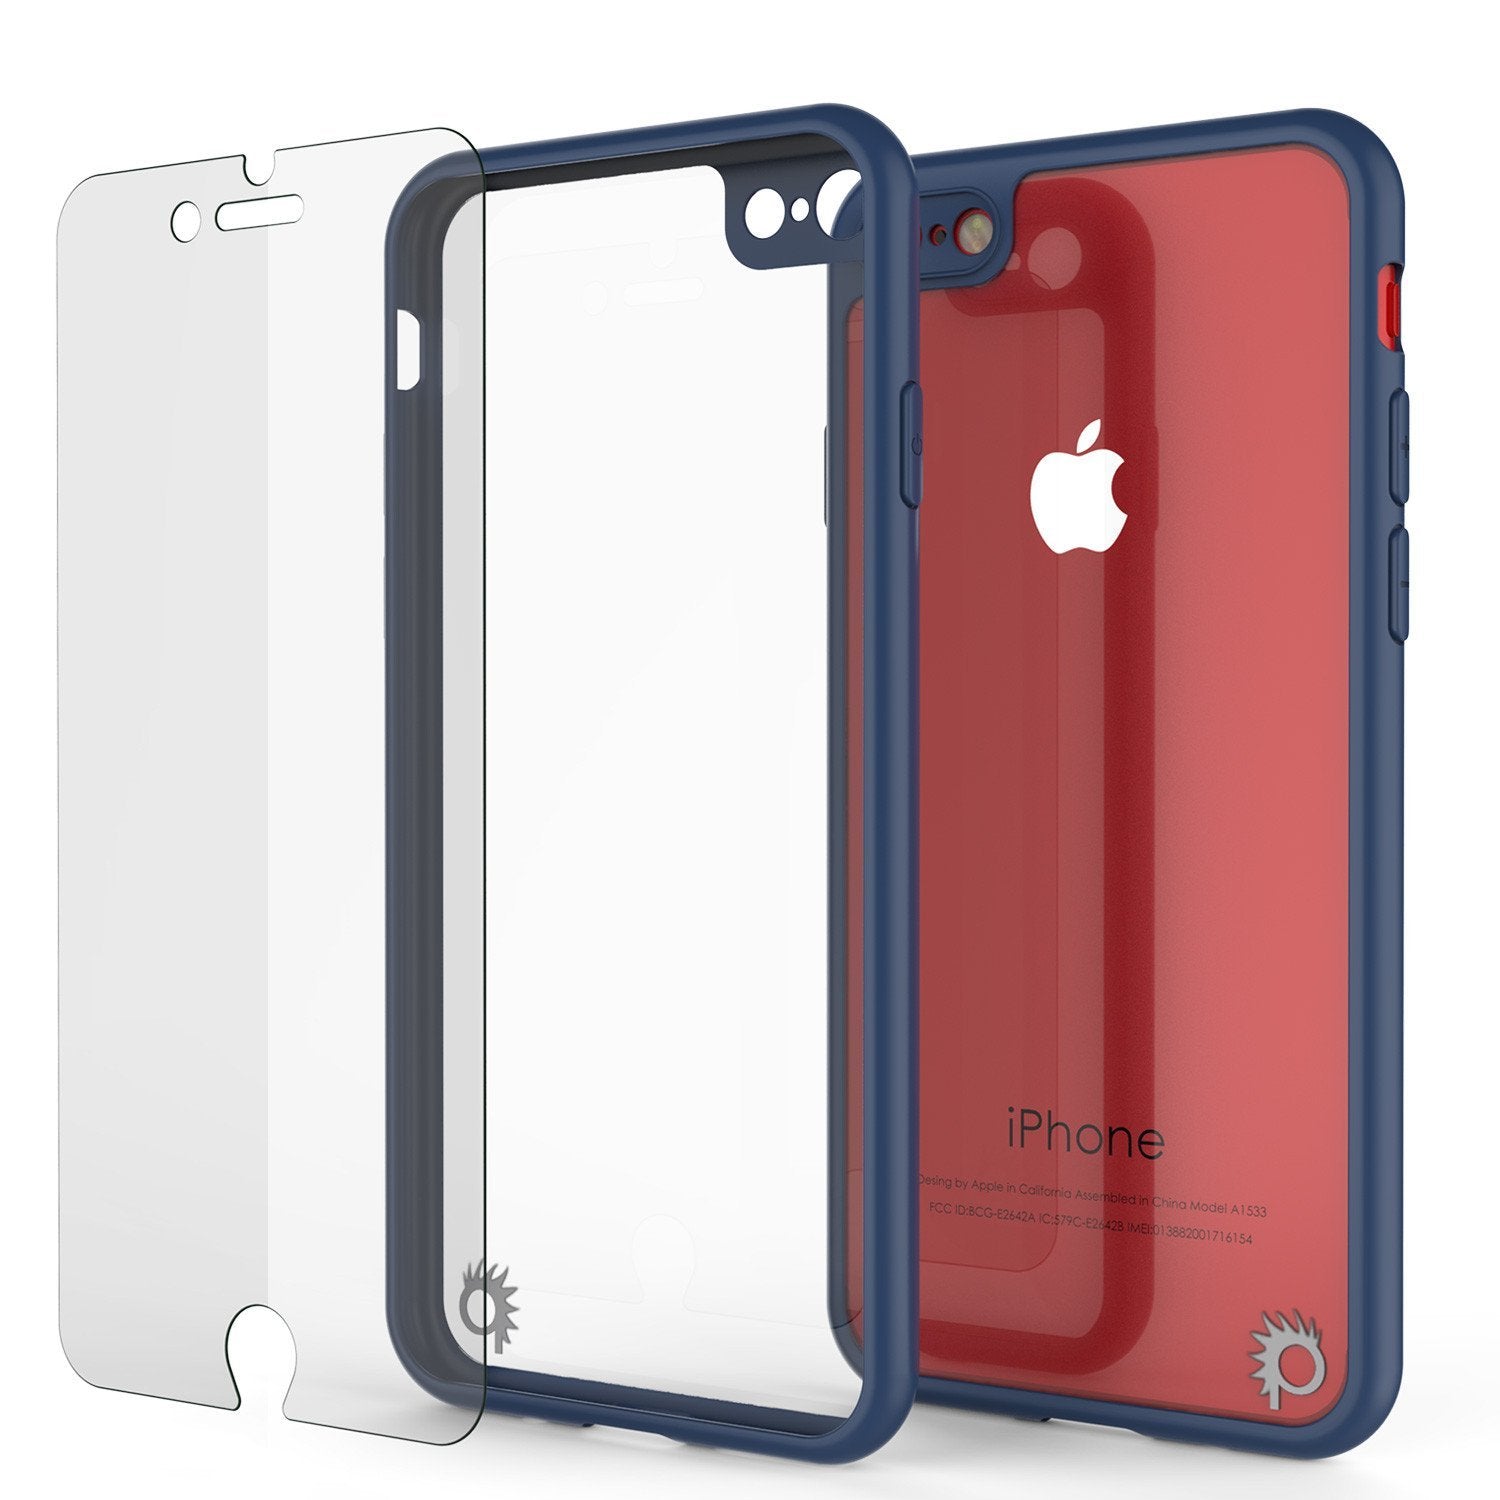 iPhone 8 Case [MASK Series] [NAVY] Full Body Hybrid Dual Layer TPU Cover W/ protective Tempered Glass Screen Protector - PunkCase NZ